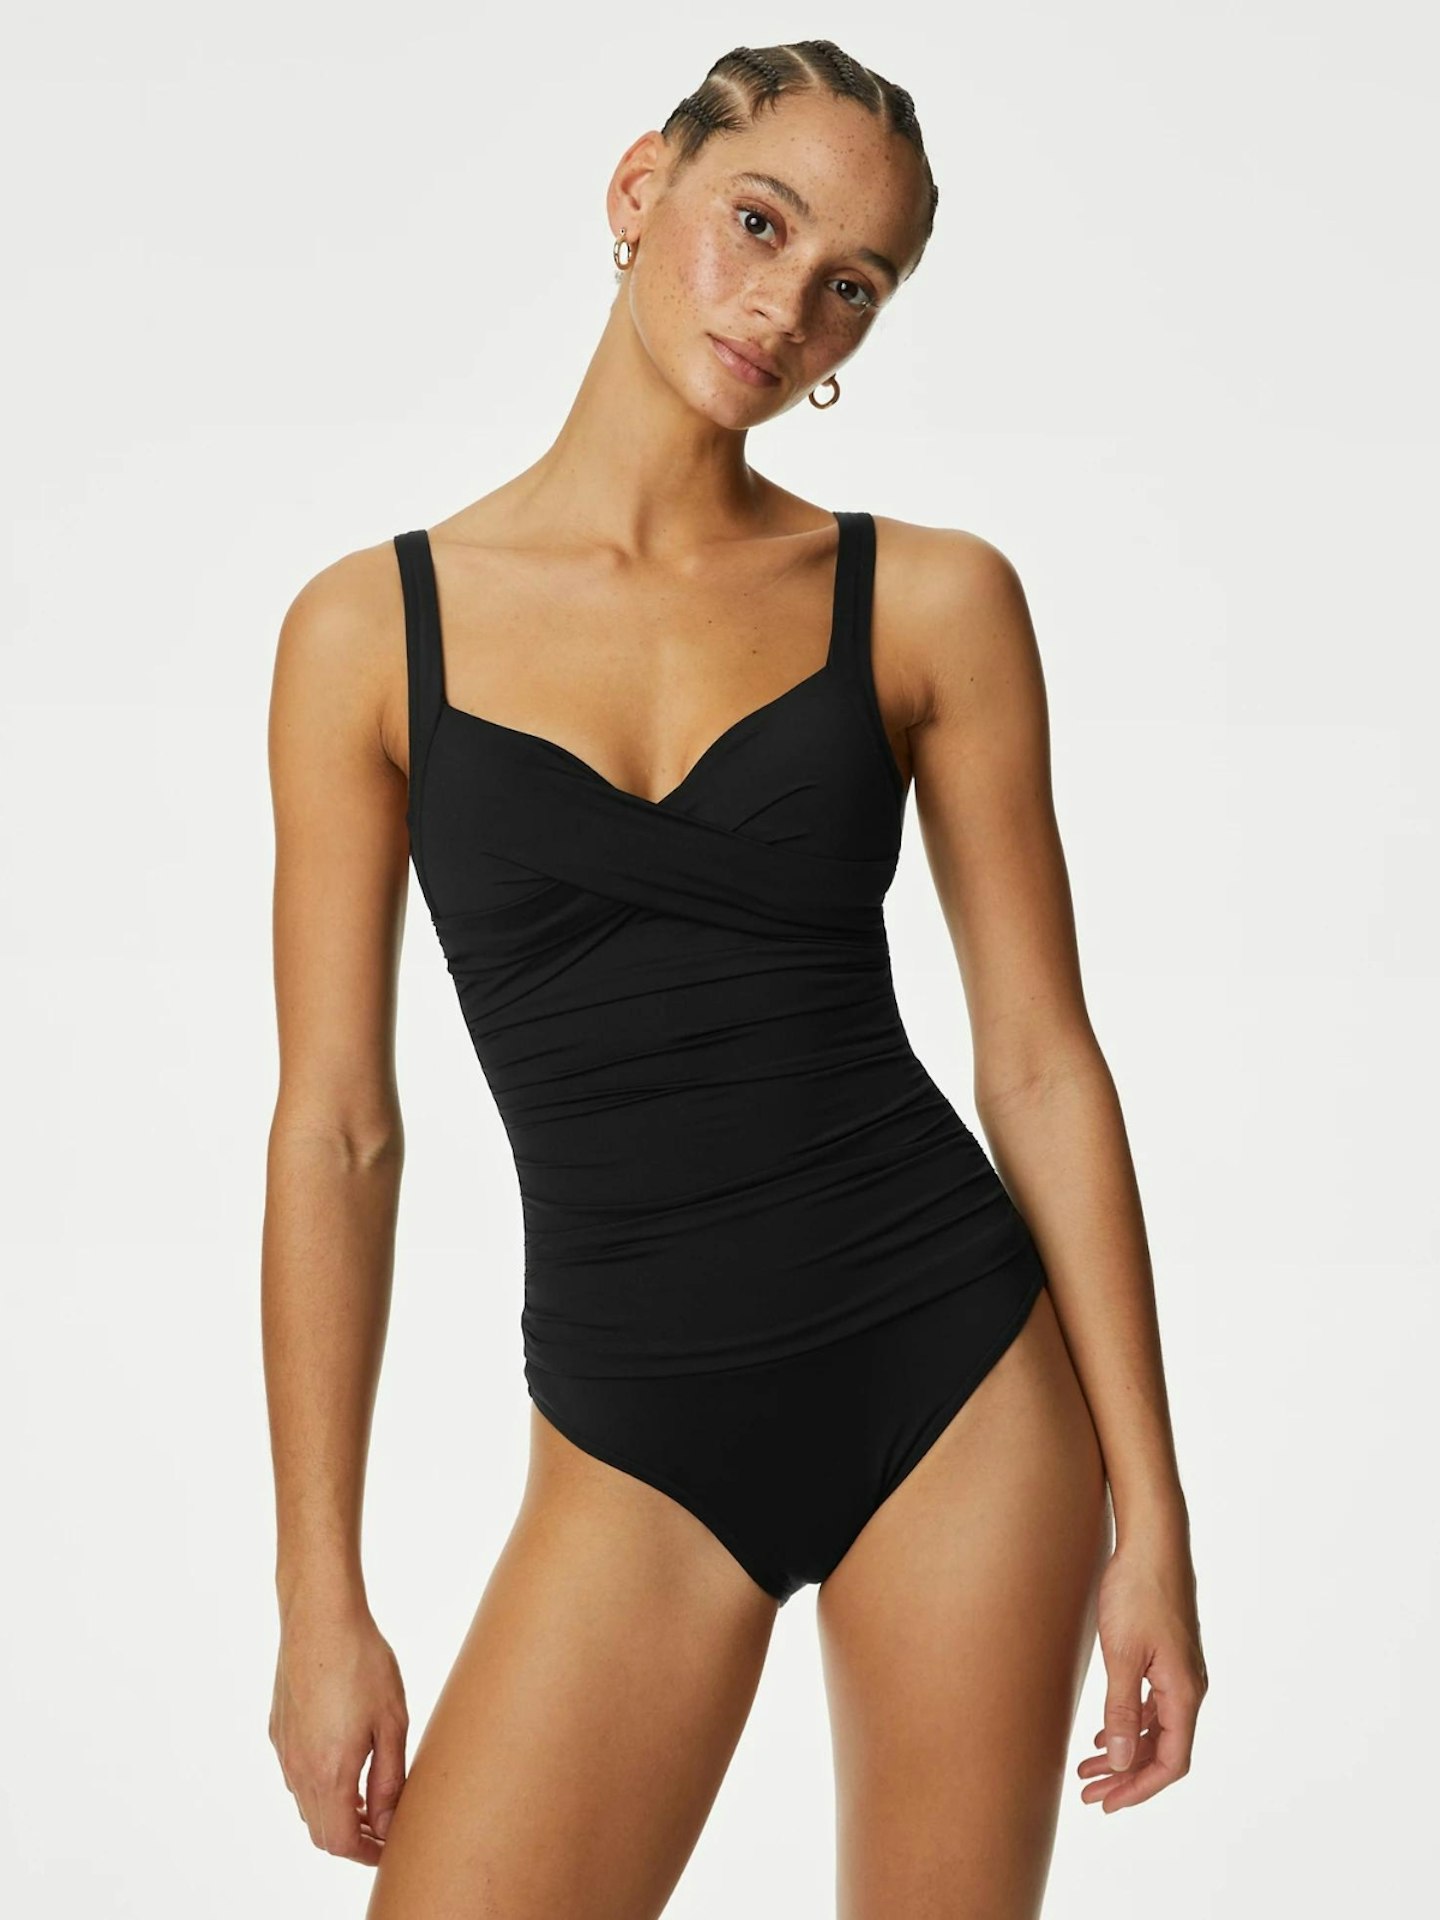 This M&S Swimsuit Sells Every Two Minutes